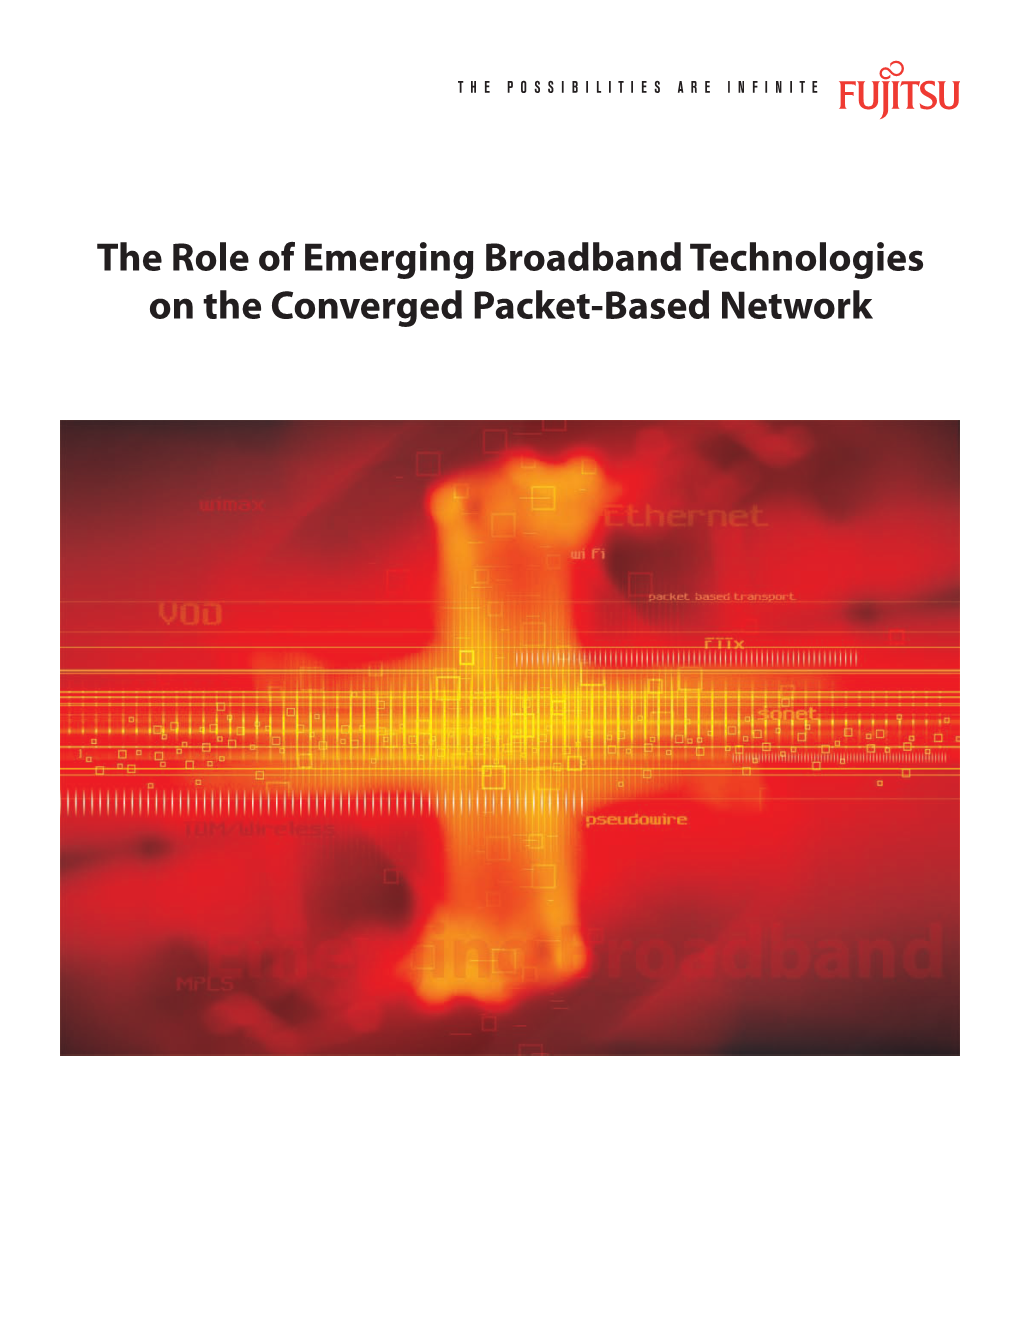 The Role of Emerging Broadband Technologies on the Converged